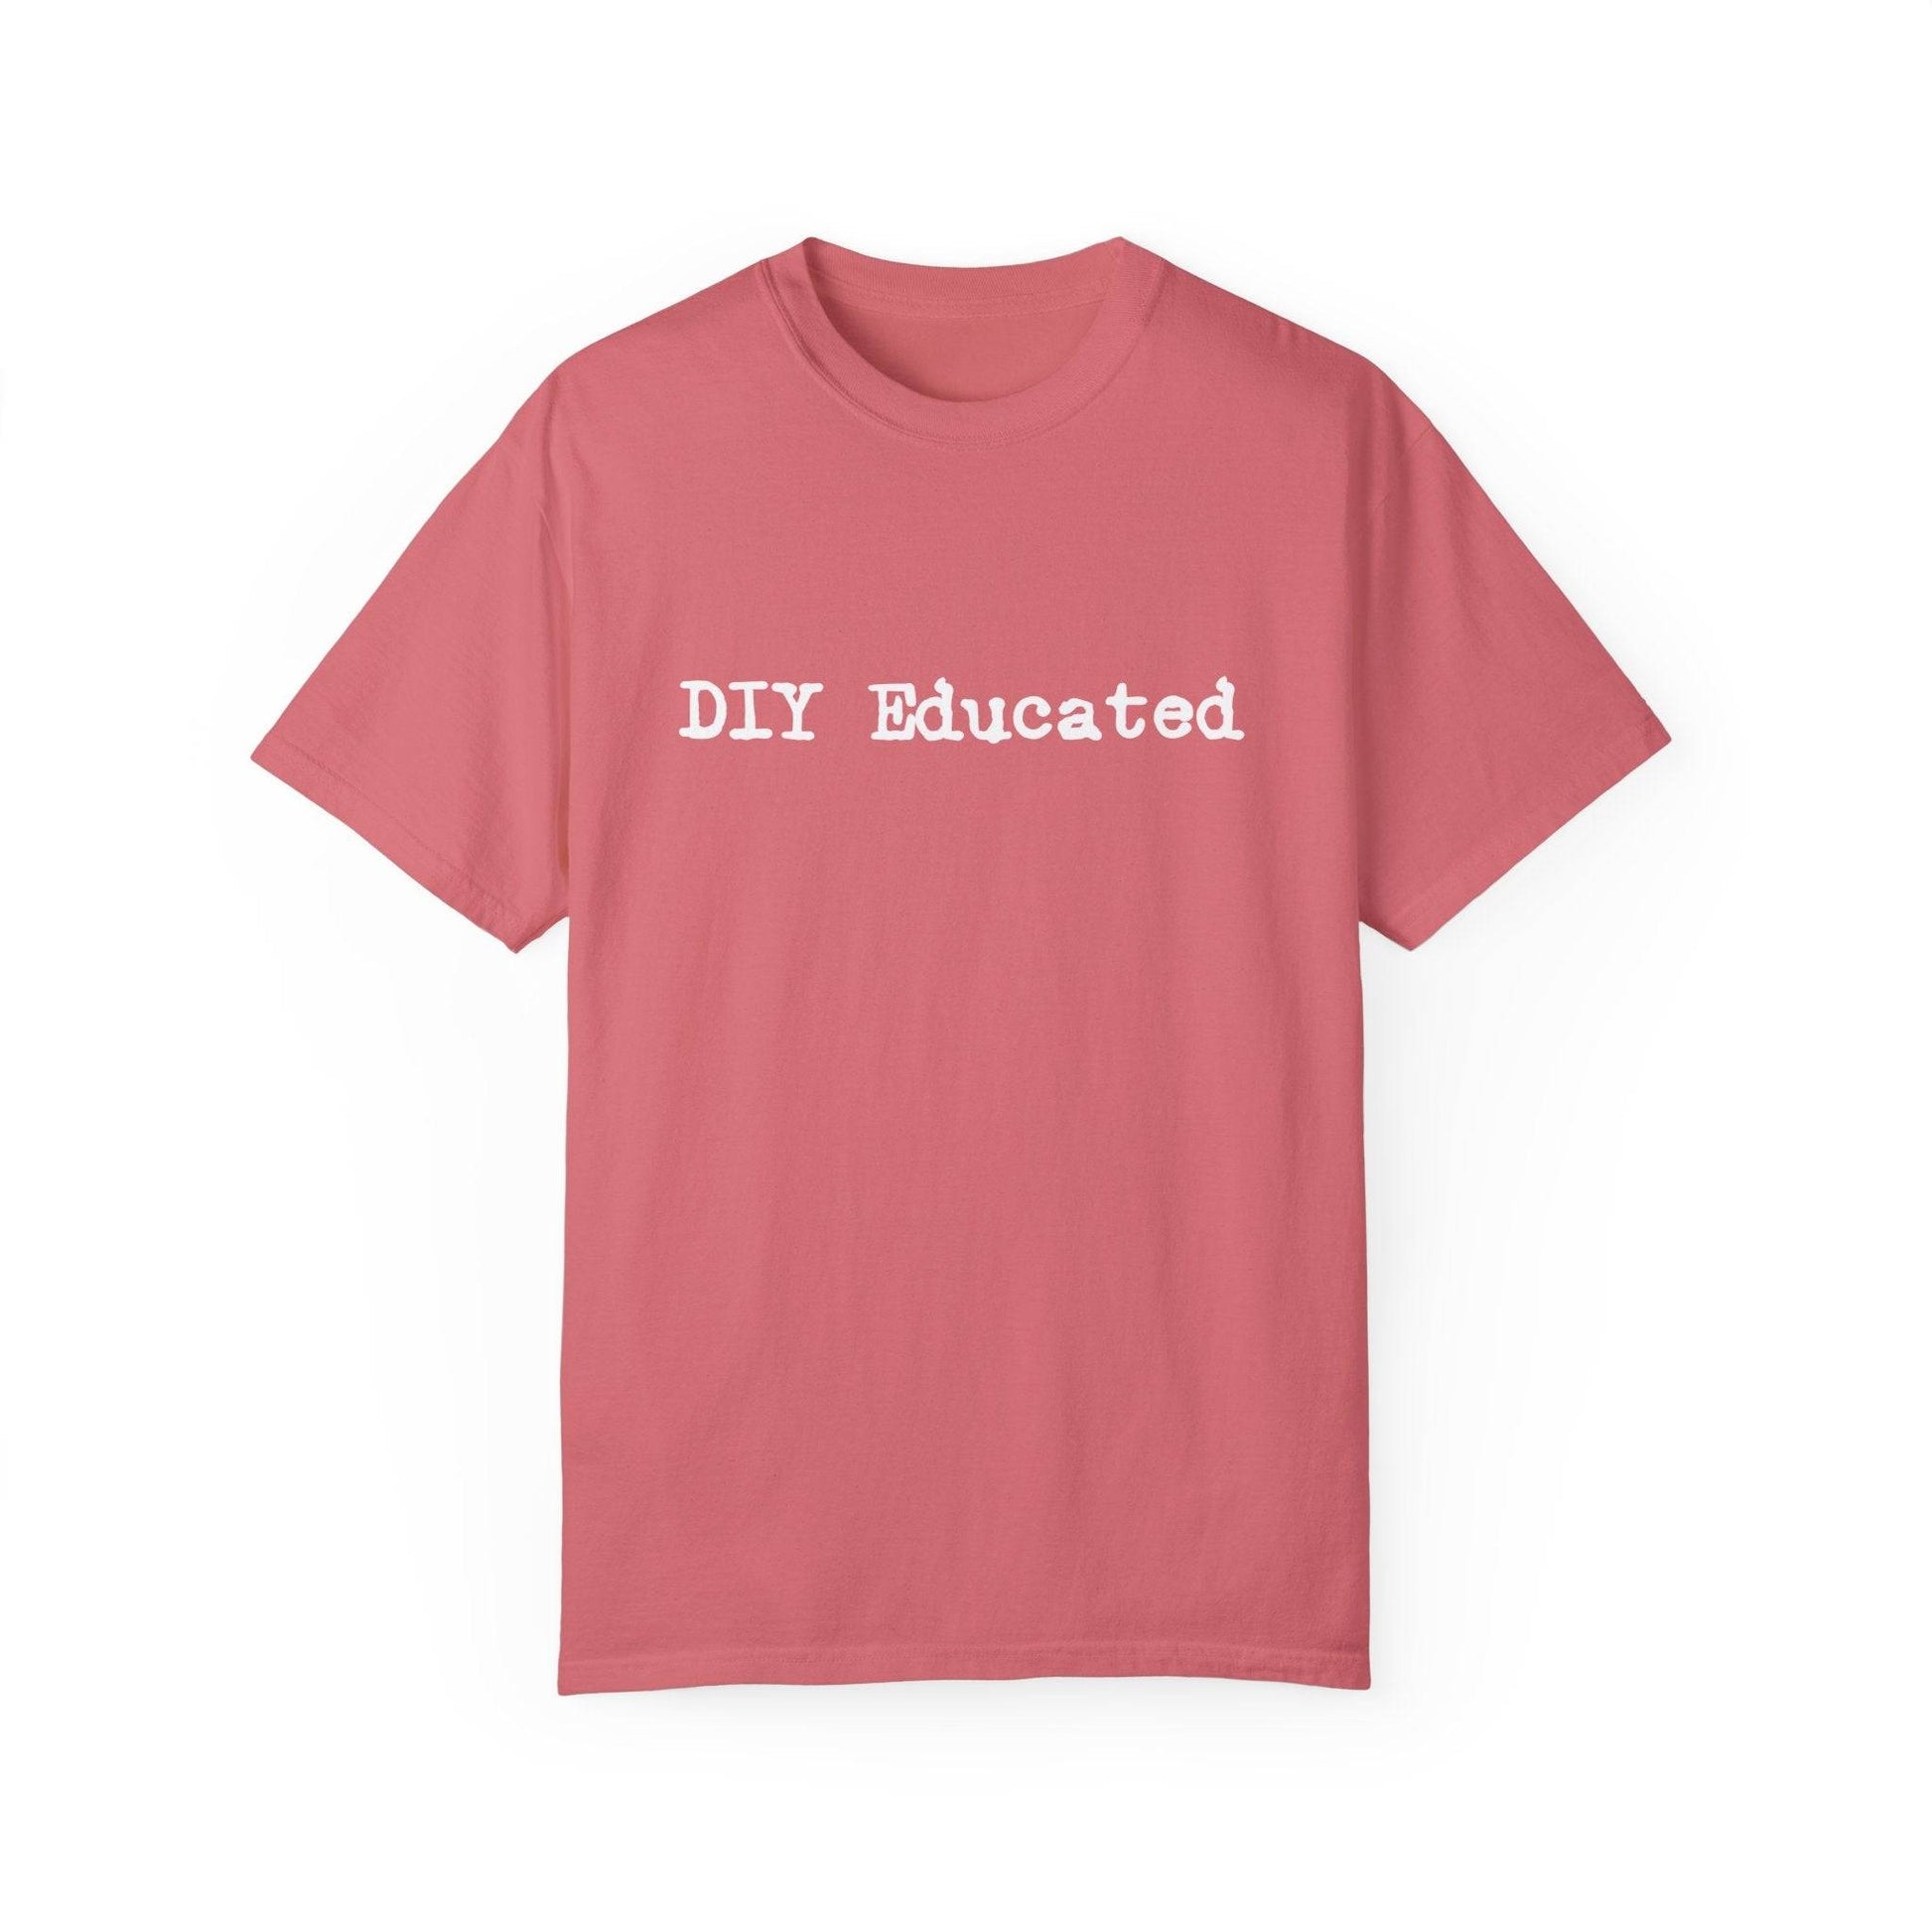 DIY Educated Teen T-shirt Adult size Funny Trendy shirt